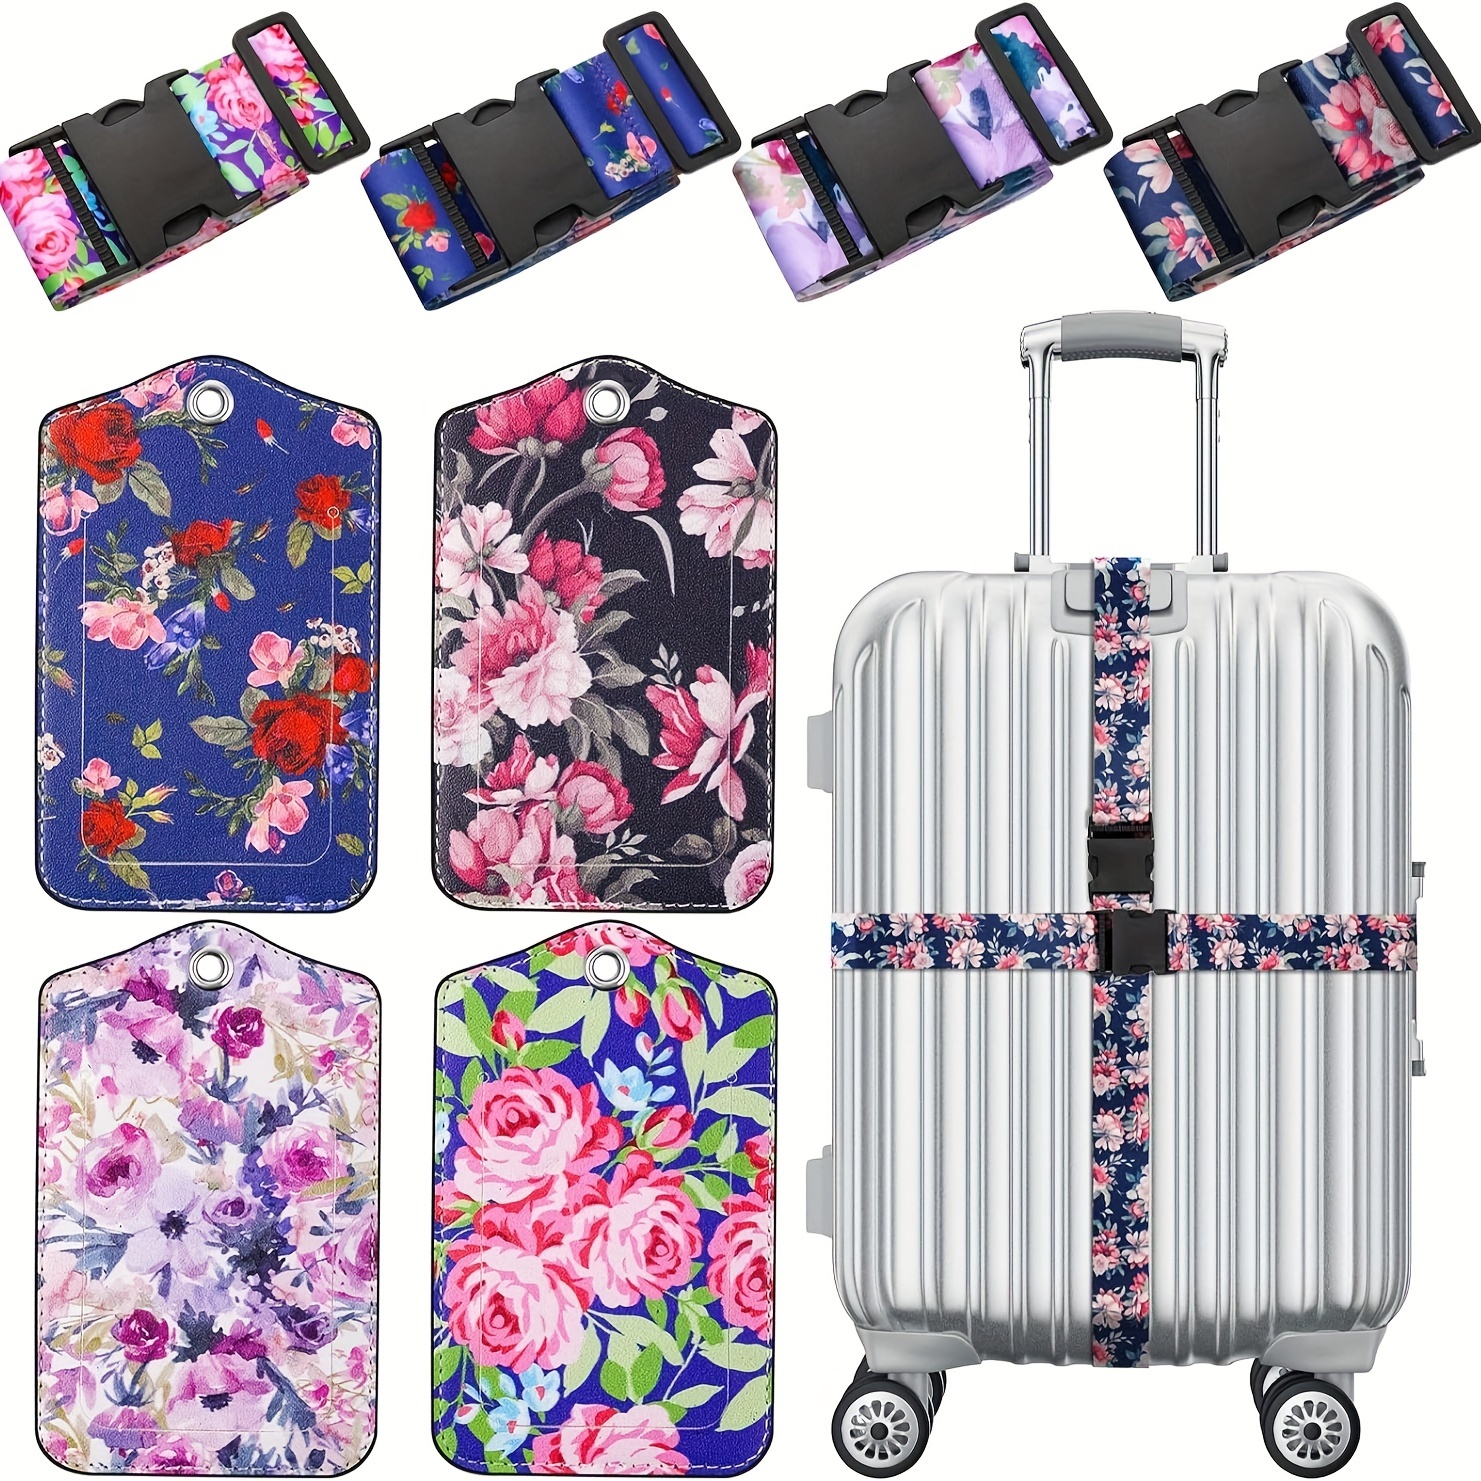  4 Sets Luggage Straps Luggage Tags Adjustable Suitcase Belts  Travel Silicone Suitcase Tags with Name ID Card for Luggage Suitcase Travel  Accessories : Clothing, Shoes & Jewelry